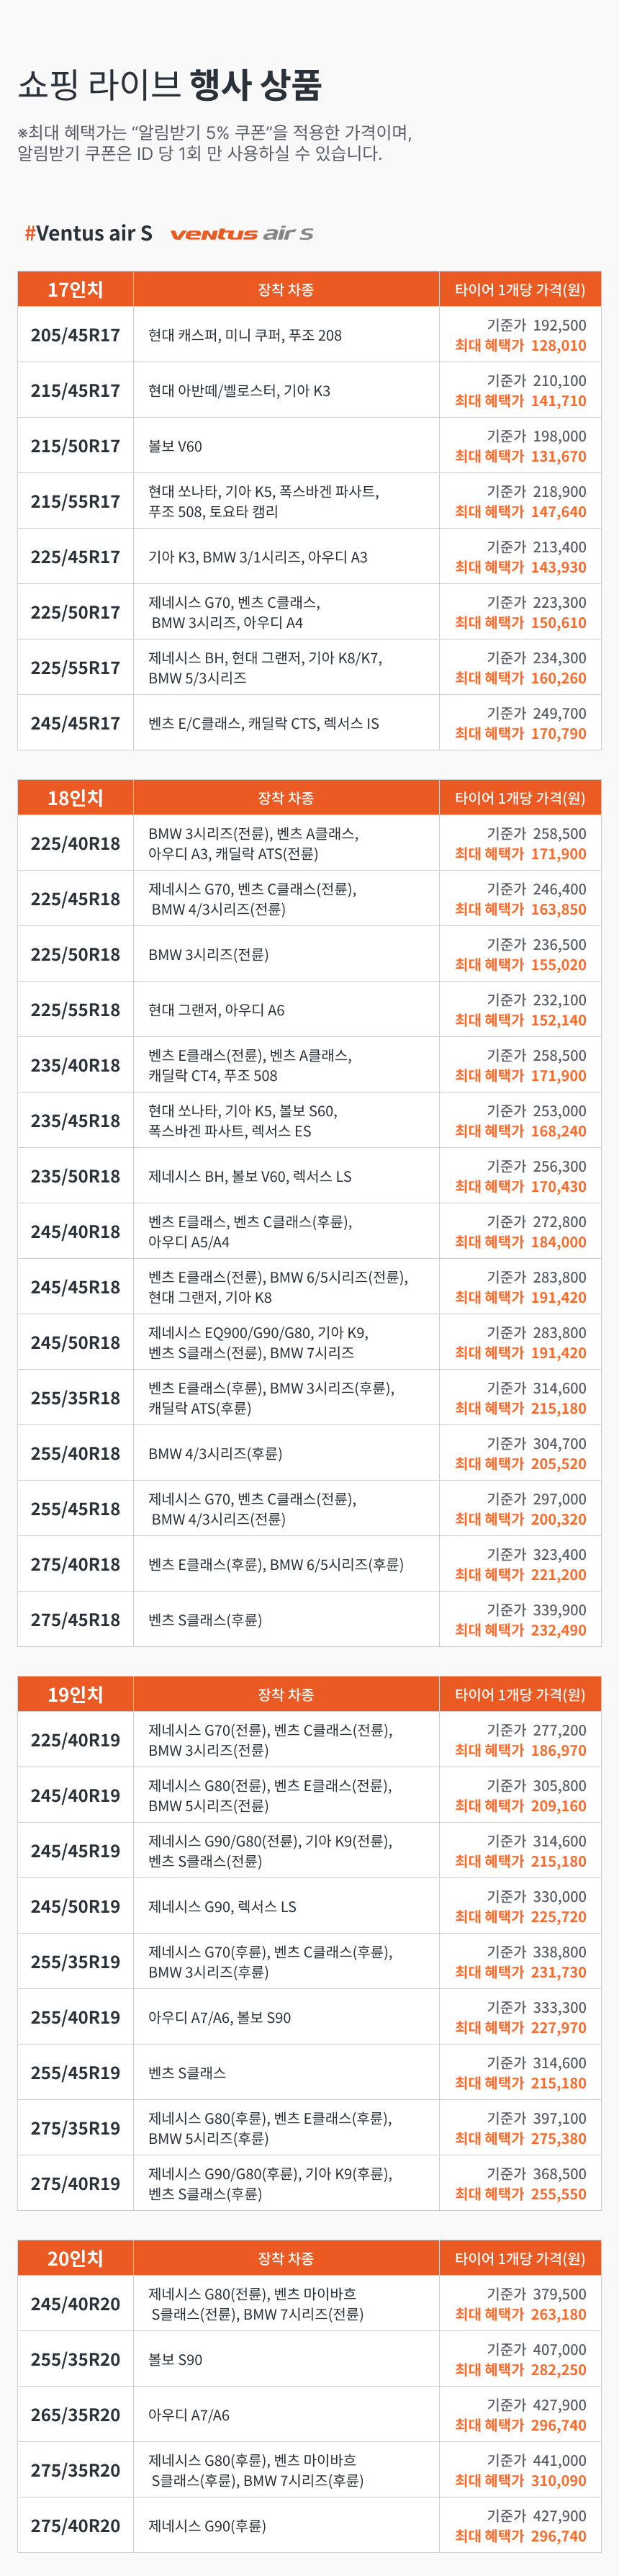 naver_shopping_live_notice_product_list.jpg